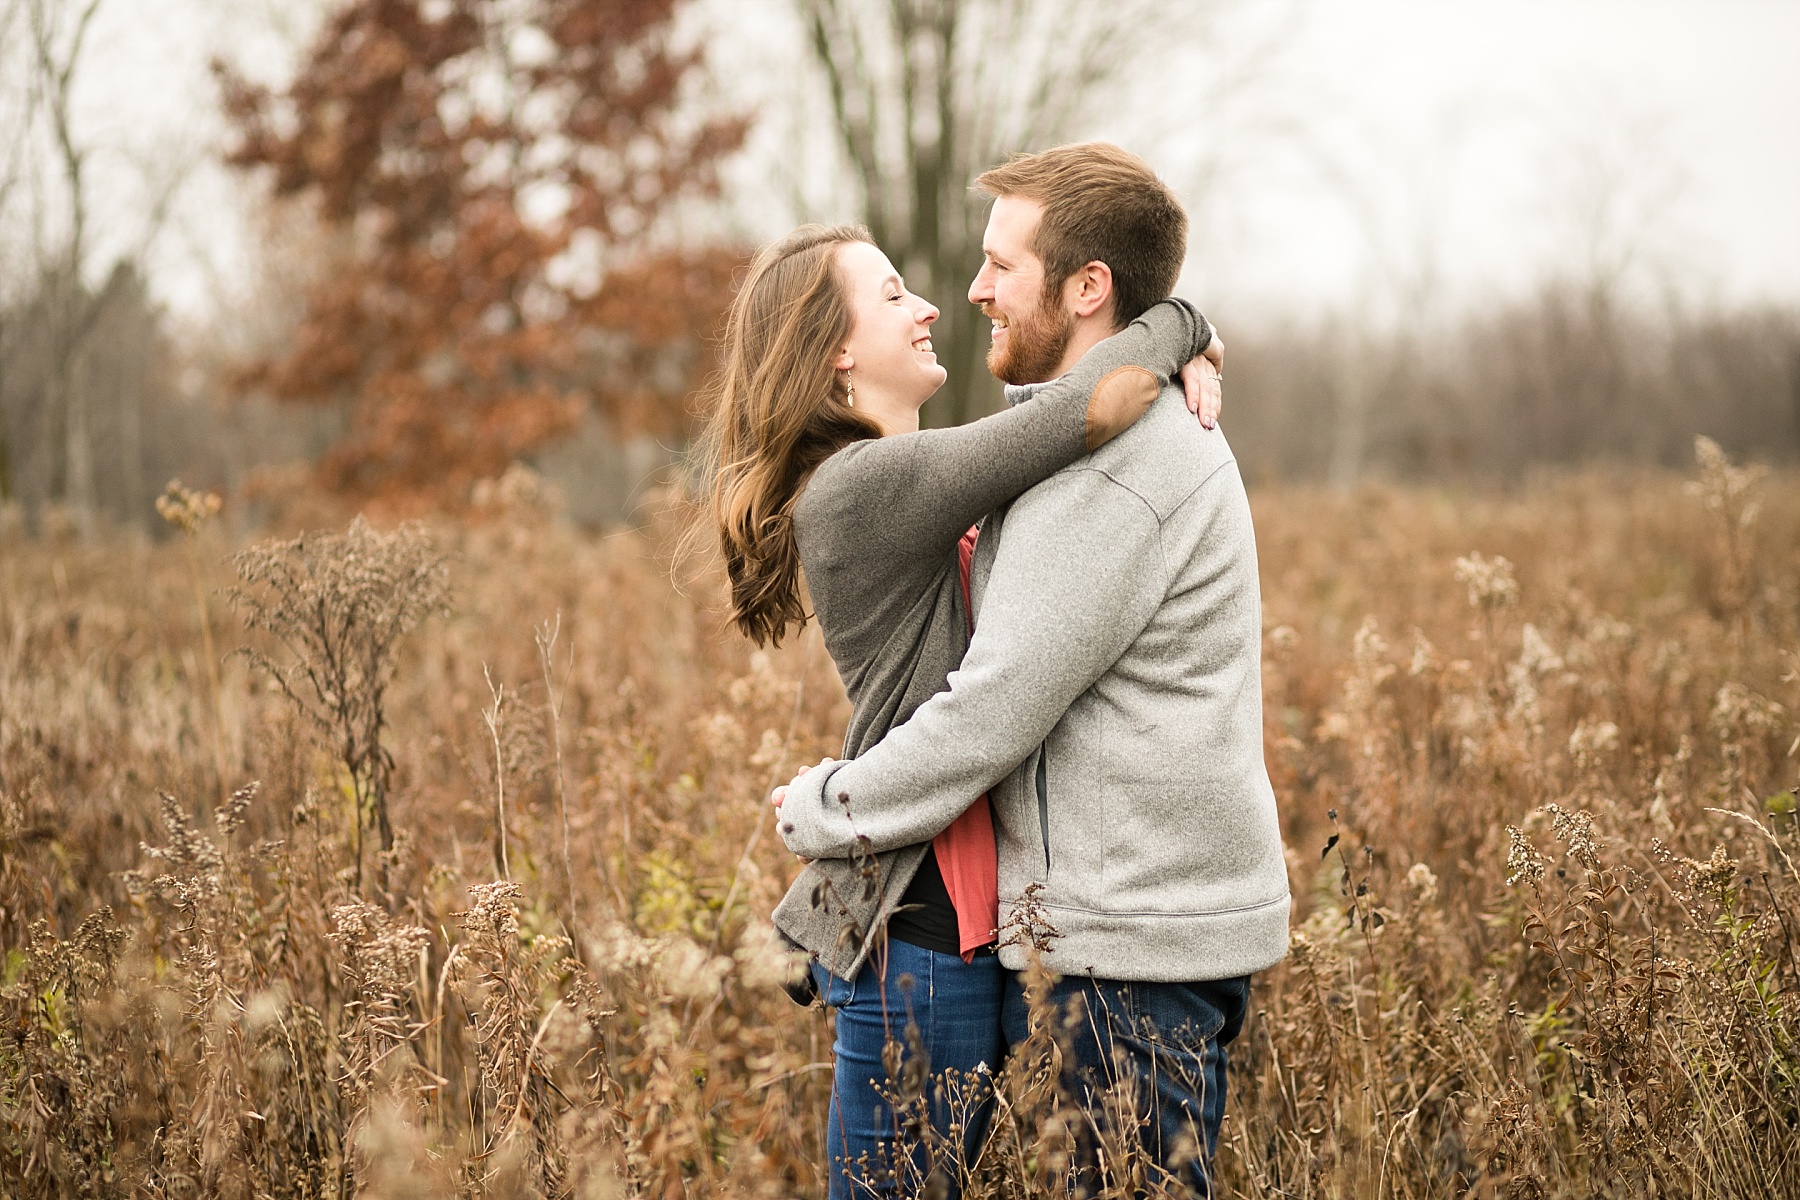 A stroll through a field in a flowing blue dress was perfection for Amber & Dillon's late fall Wisconsin engagement photos.